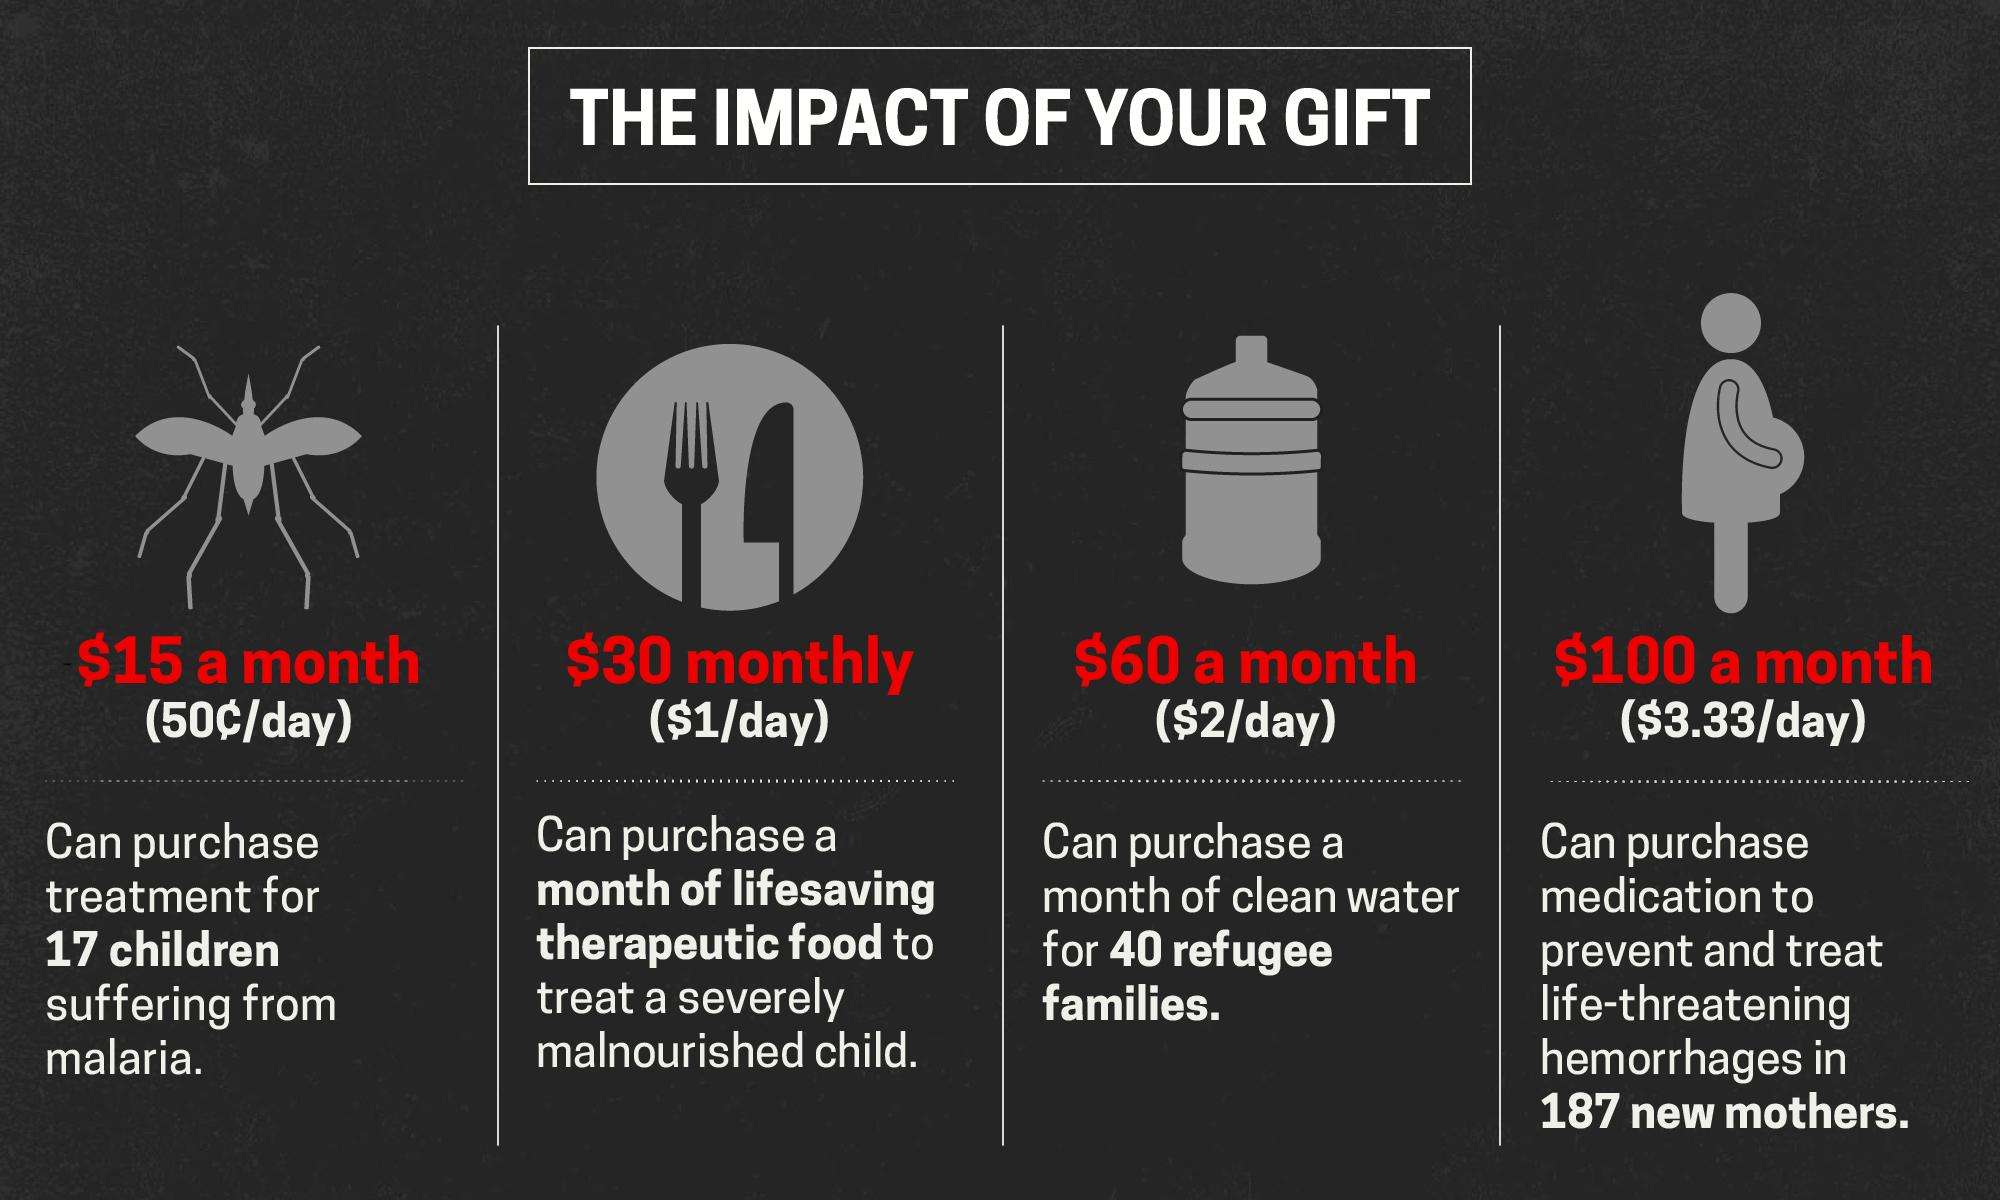 The Doctors Without Borders monthly giving program page highlights the impact of giving at different levels. 